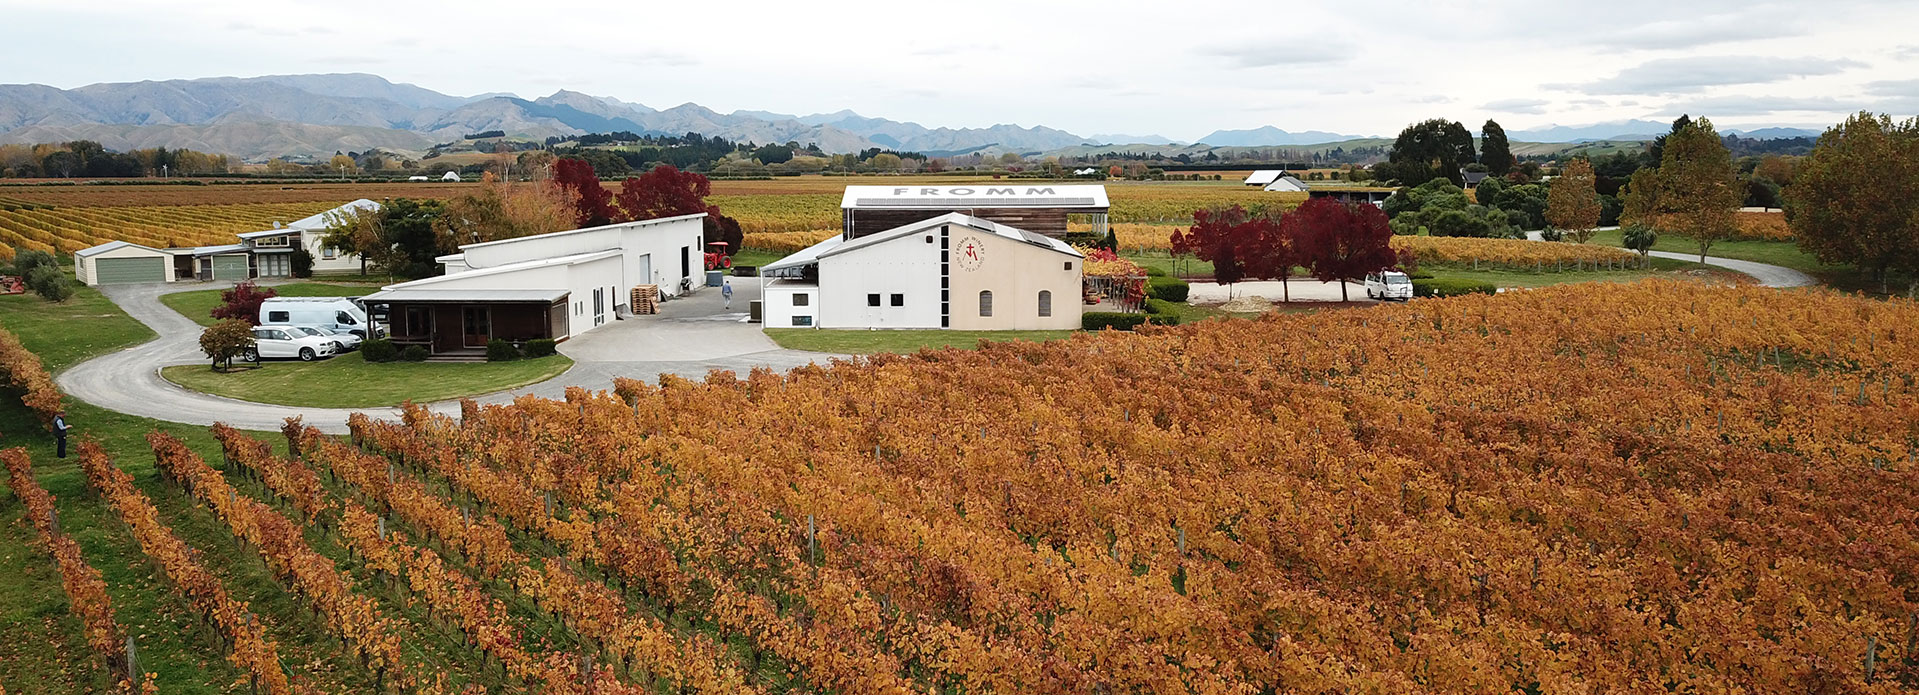 Aerial view of the FROMM Winery in Marlborough, New Zealand, in the middle of their organic vineyards.